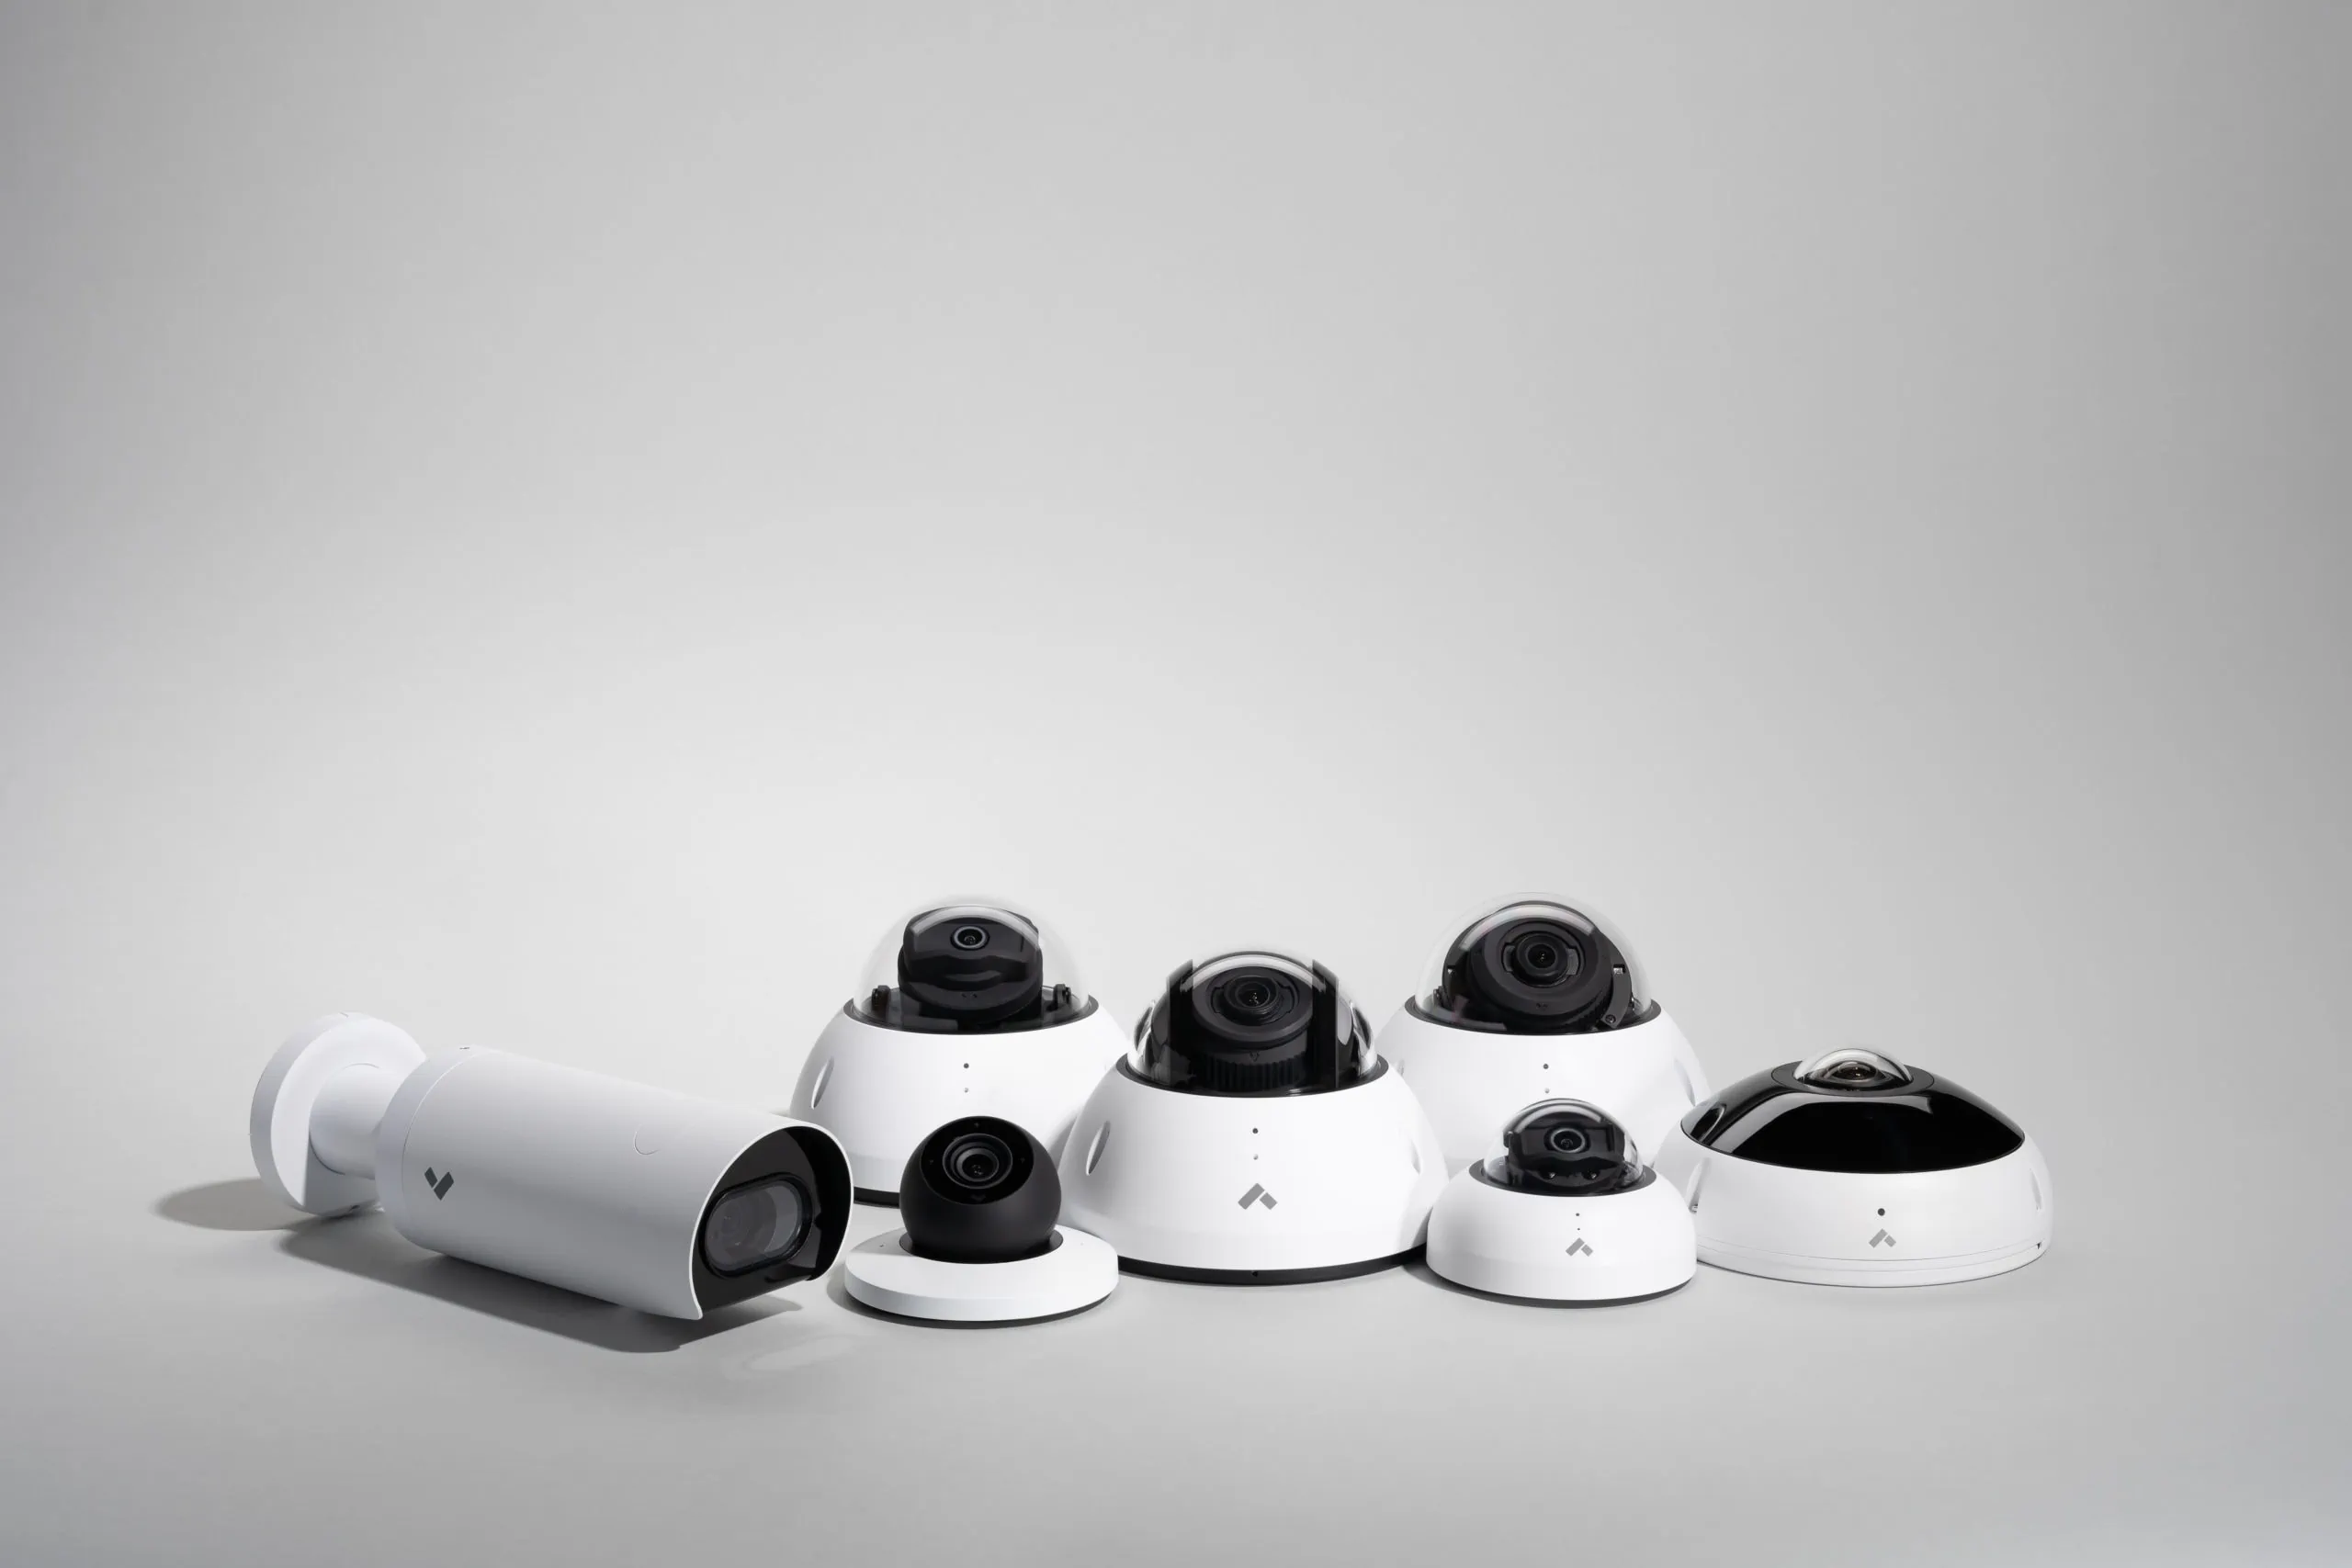 Camera family for cannabis security solutions